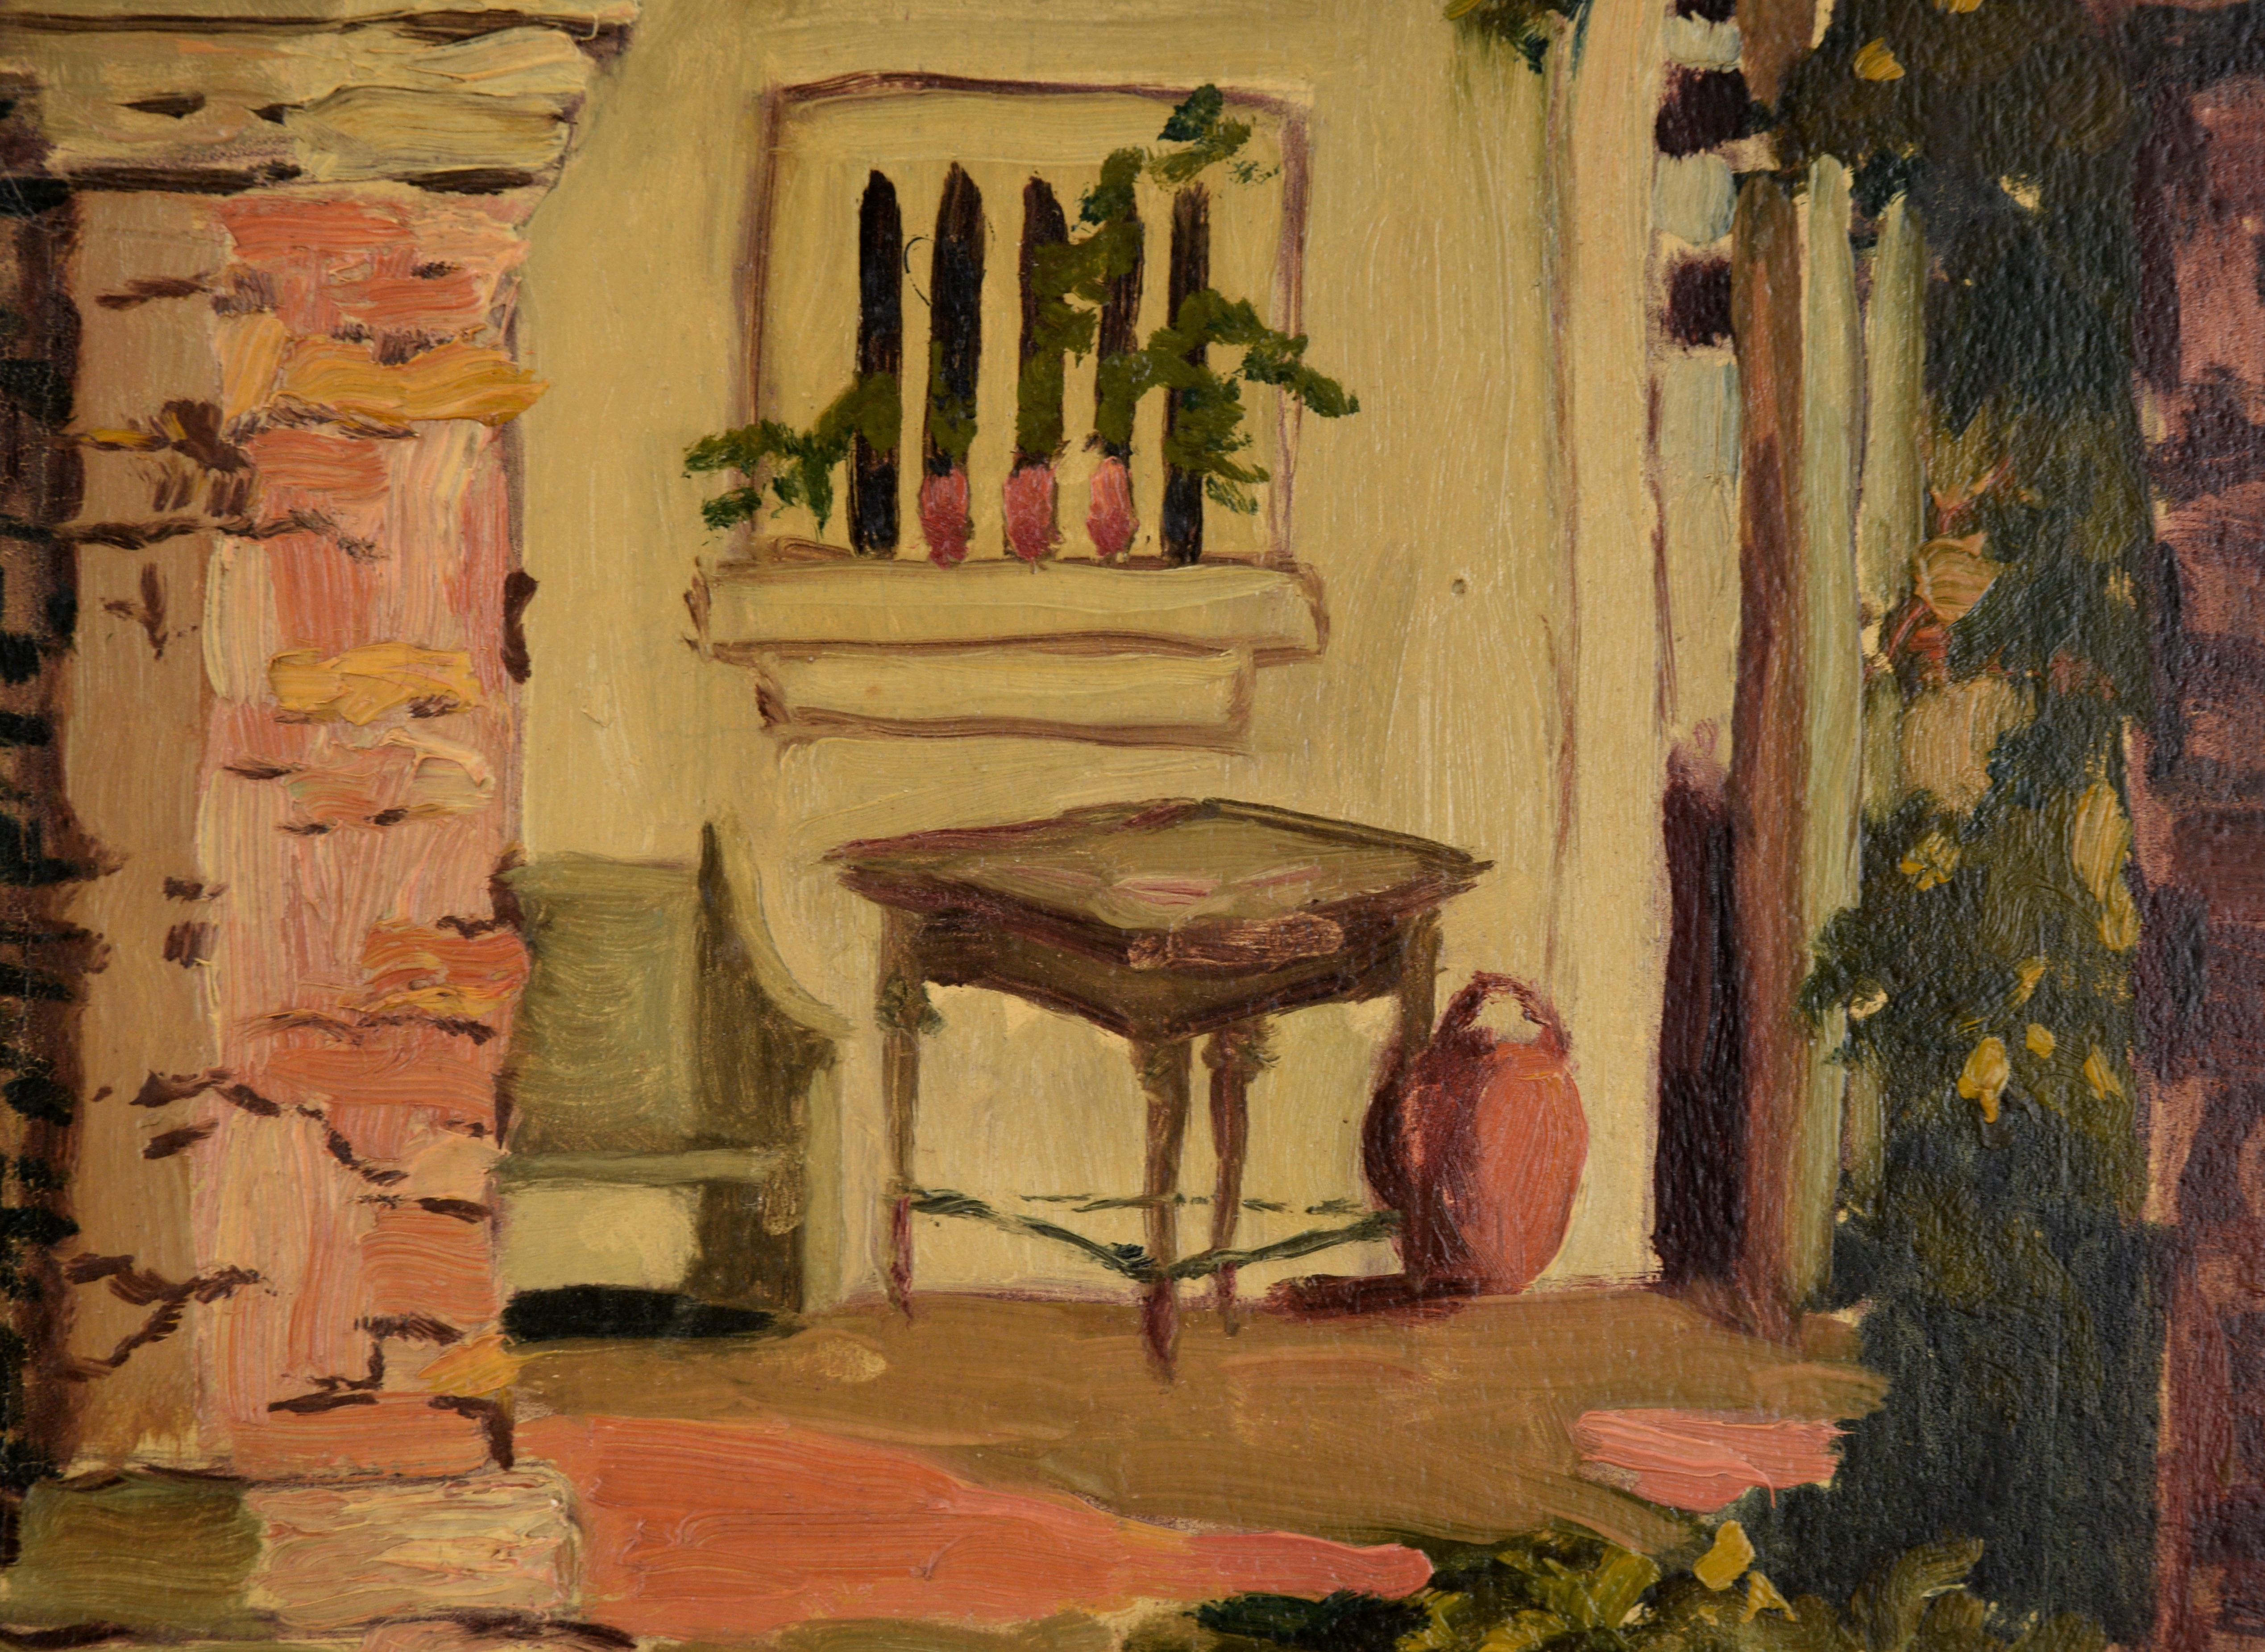 Interior courtyard scene by Mary Scott (American, late 19th/early 20th C). Two large stone columns support an arch, framing the composition. Between the columns, some of the courtyard can be seen, including a tree and the edges of a grassy area.